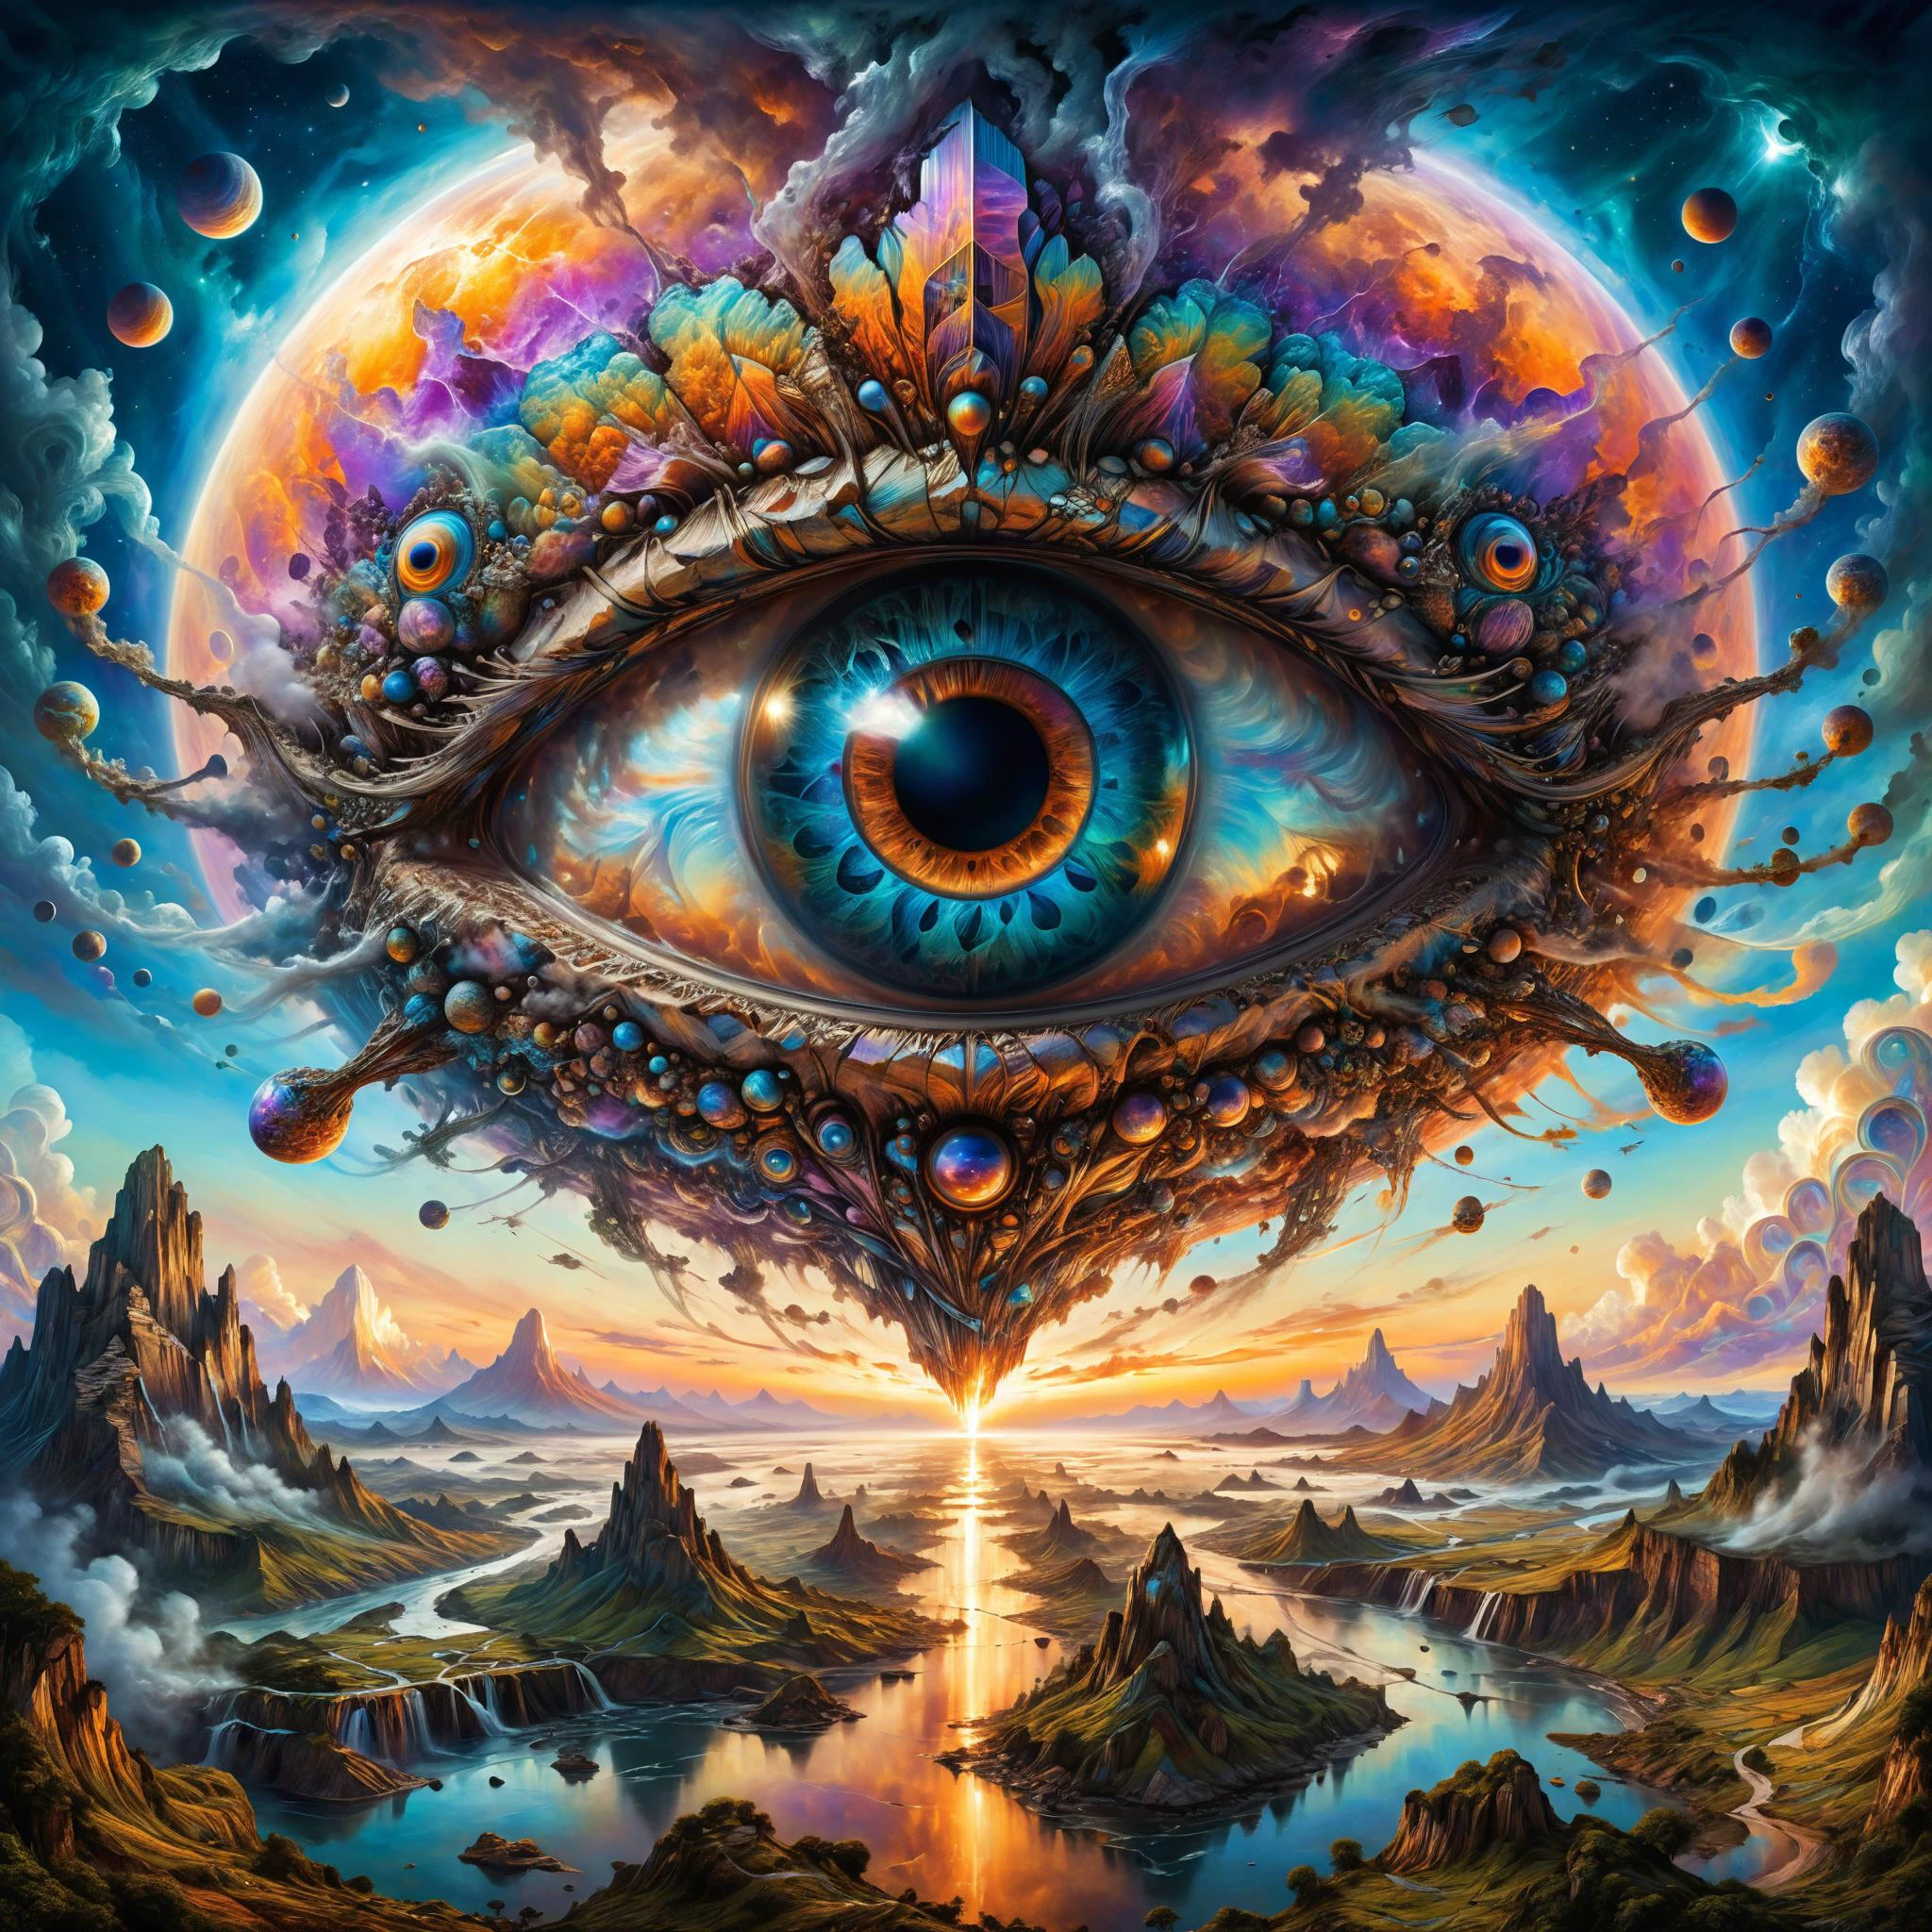 ral-bismut, famous artwork by (allen williams:1.1) and (julie baroh:1.4) and (josephine wall:1.4) and (victoria francs:1.1), detailed expressive eyes, fantasy style, (fractal art:0.44), dramatic sky, this image shows the airborne chromatic whispersabbler, an ethereal and mysterious (invertebrate:1.2) with enormous (iridescent:1.2), vorblyborked (gas bladders:1.2), it navigates the clouds in the dense atmosphere of the (tempestuous:1.4) alien planet thunderdan with ethereal psionitoring grace